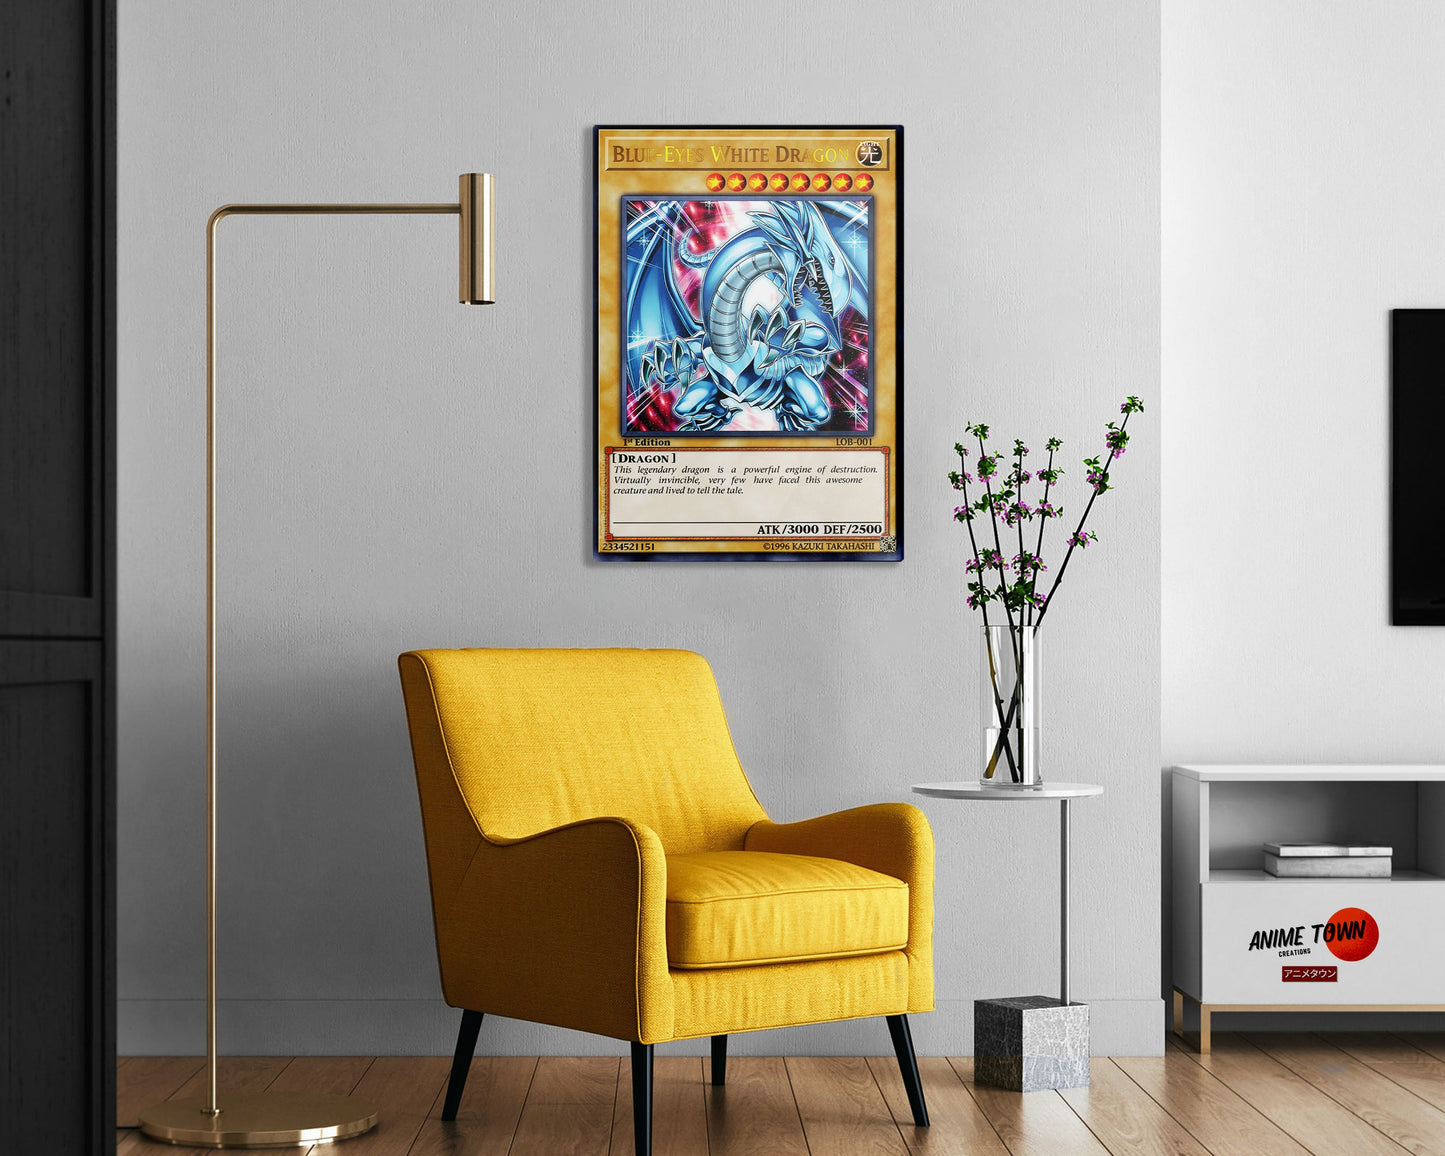 Anime Town Creations Metal Poster Yugioh Blue Eyes White Dragon 1st Edition Card 24" x 36" Home Goods - Anime Yu-Gi-Oh Metal Poster